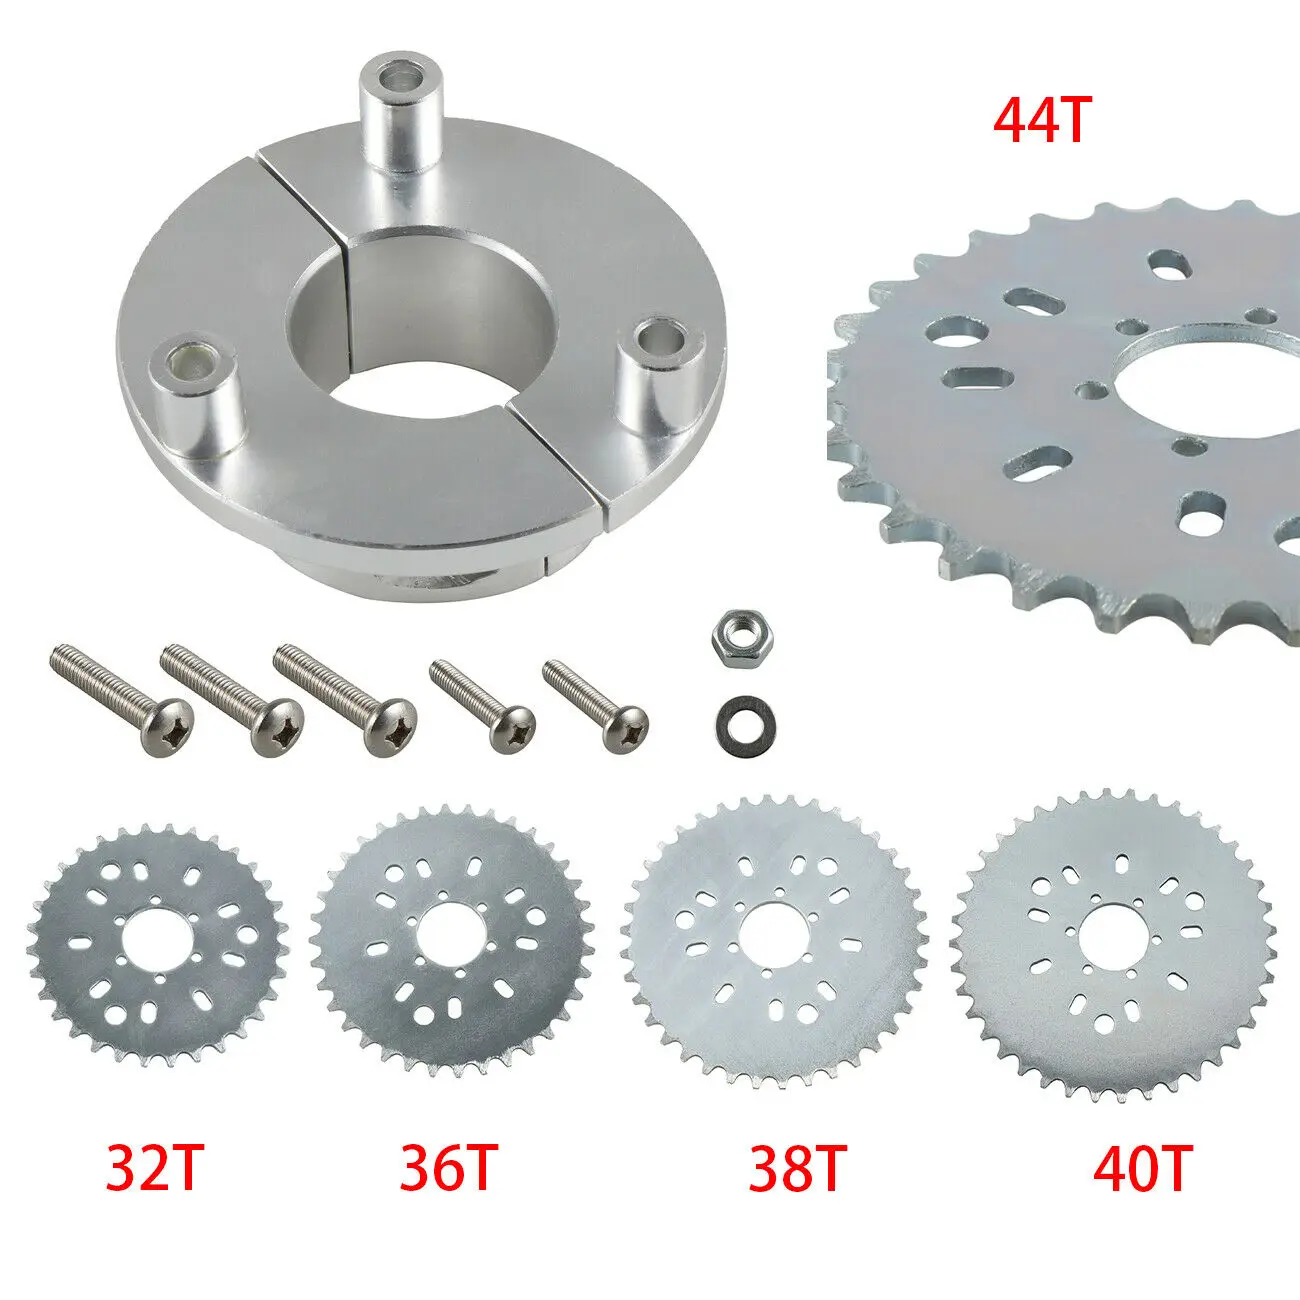 Silver CNC Sprocket 32T 36T 38T 40T 44T& Adaptor For 1.5 Inch 66cc 80cc Motorized Bicycle Bike